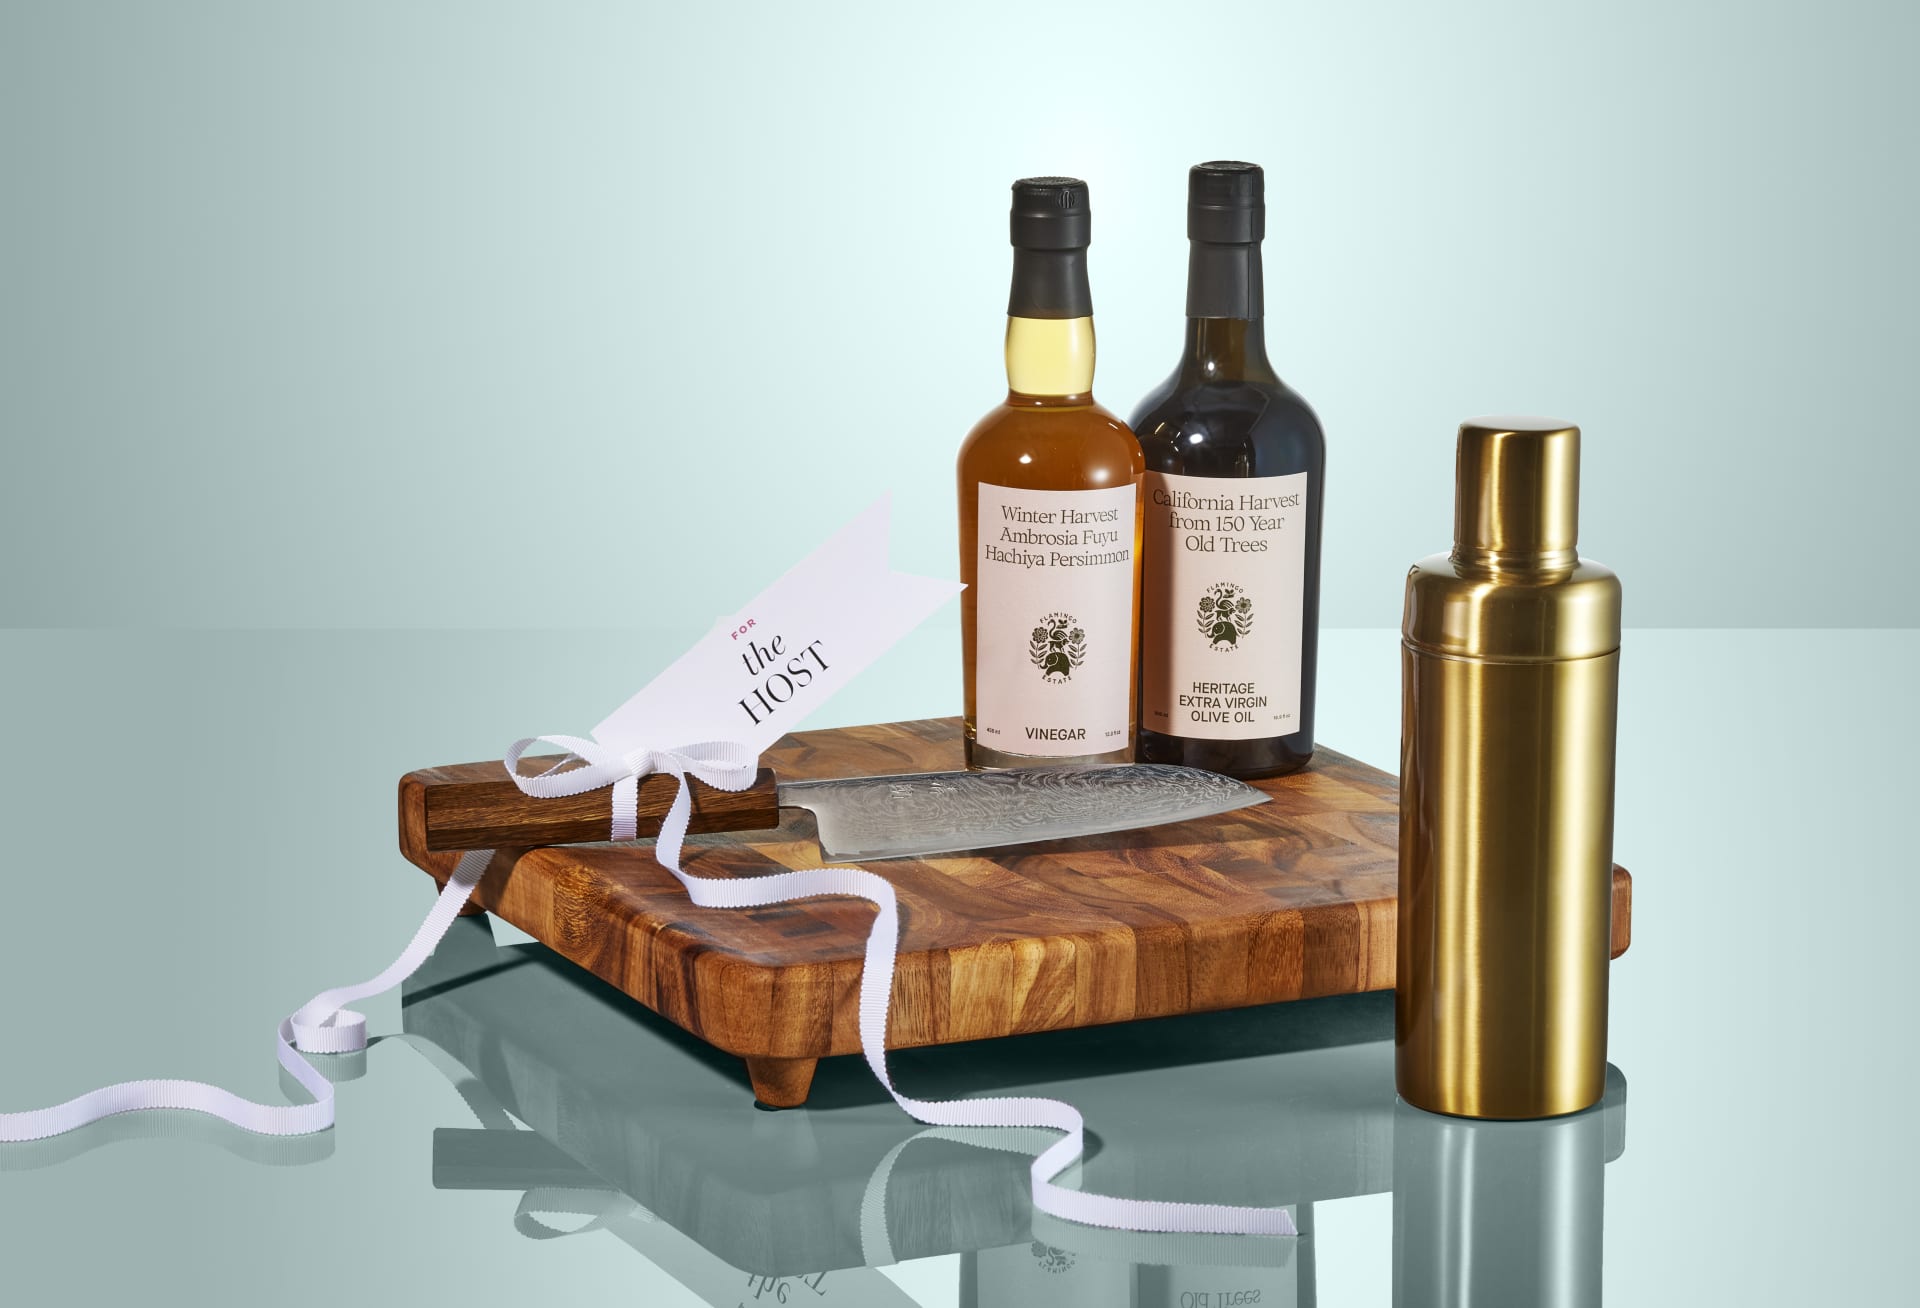 The 15 Best Gifts for Hosts, from $25 to $200